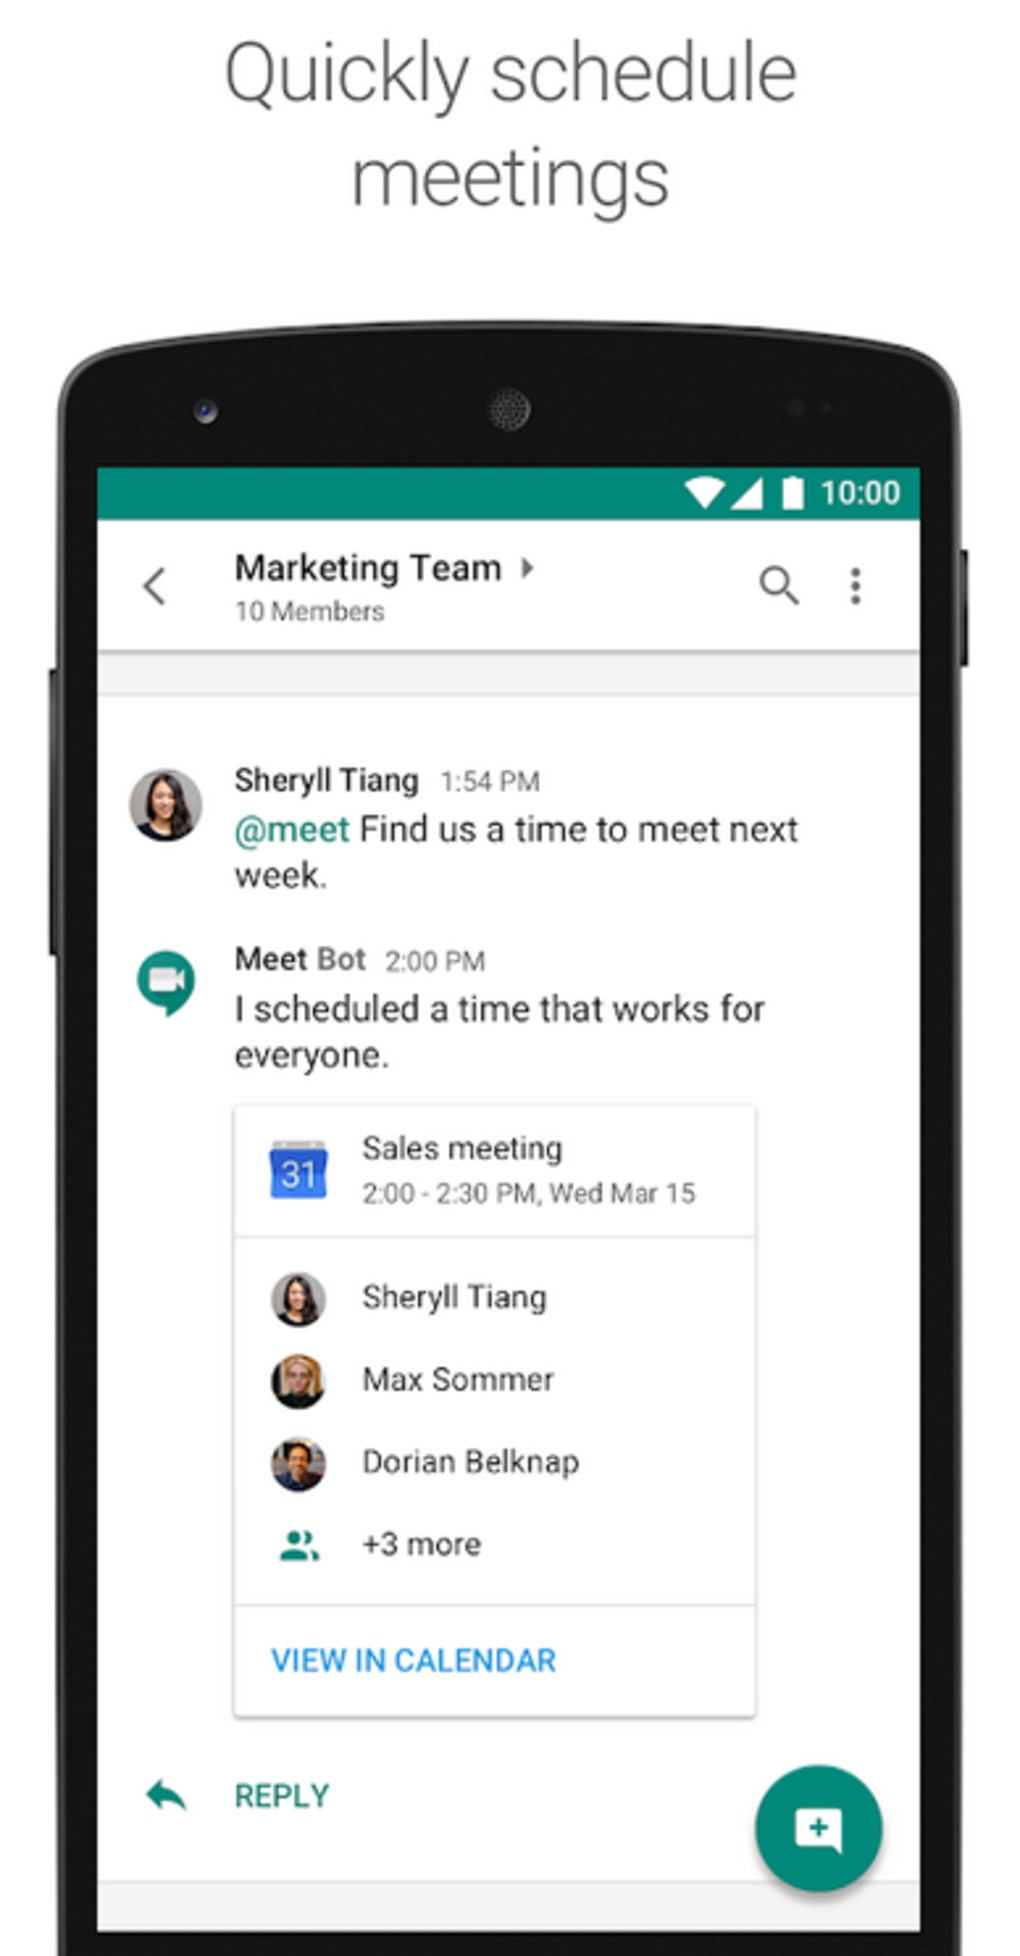 Google Chat - Apps on Google Play